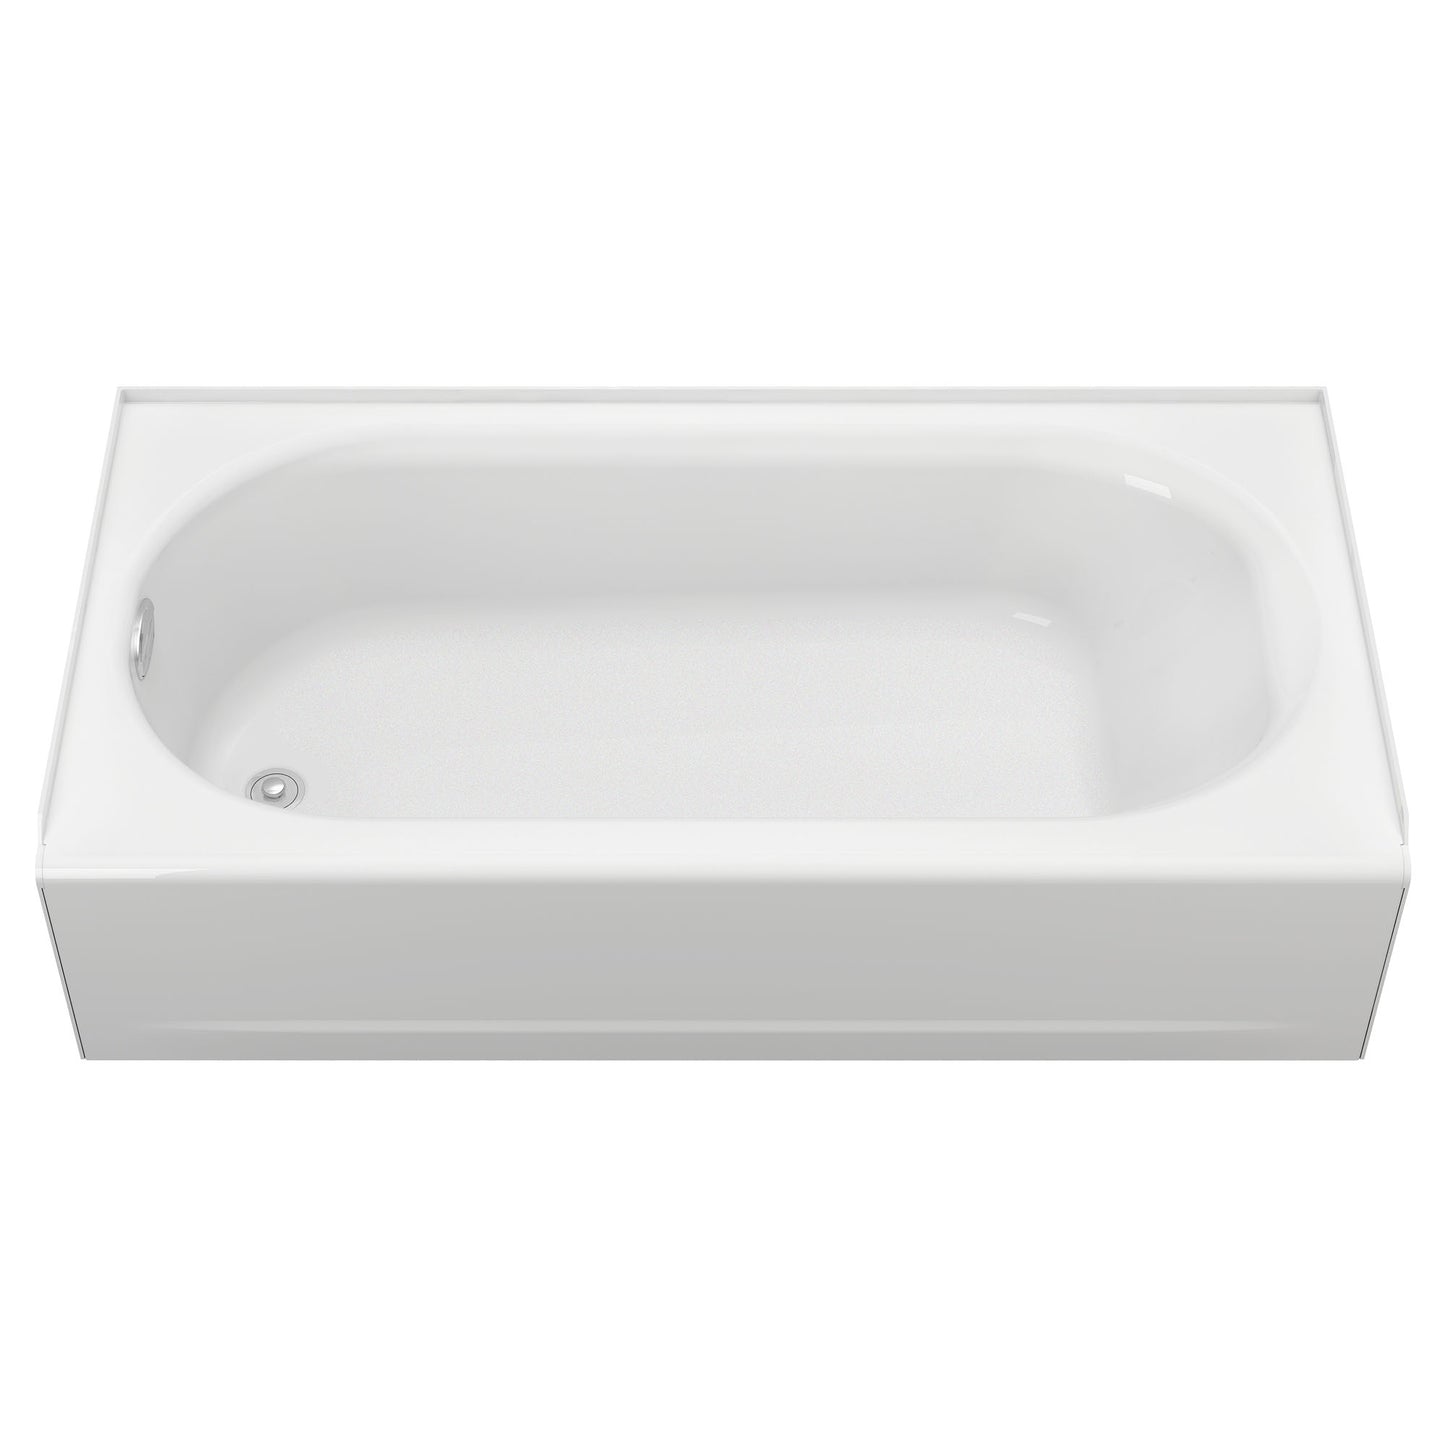 AMERICAN-STANDARD 2392202ICH.020, Princeton Americast 60 x 30-Inch Integral Apron Bathtub Above Floor Rough Left-Hand Outlet with Integral Drain in White